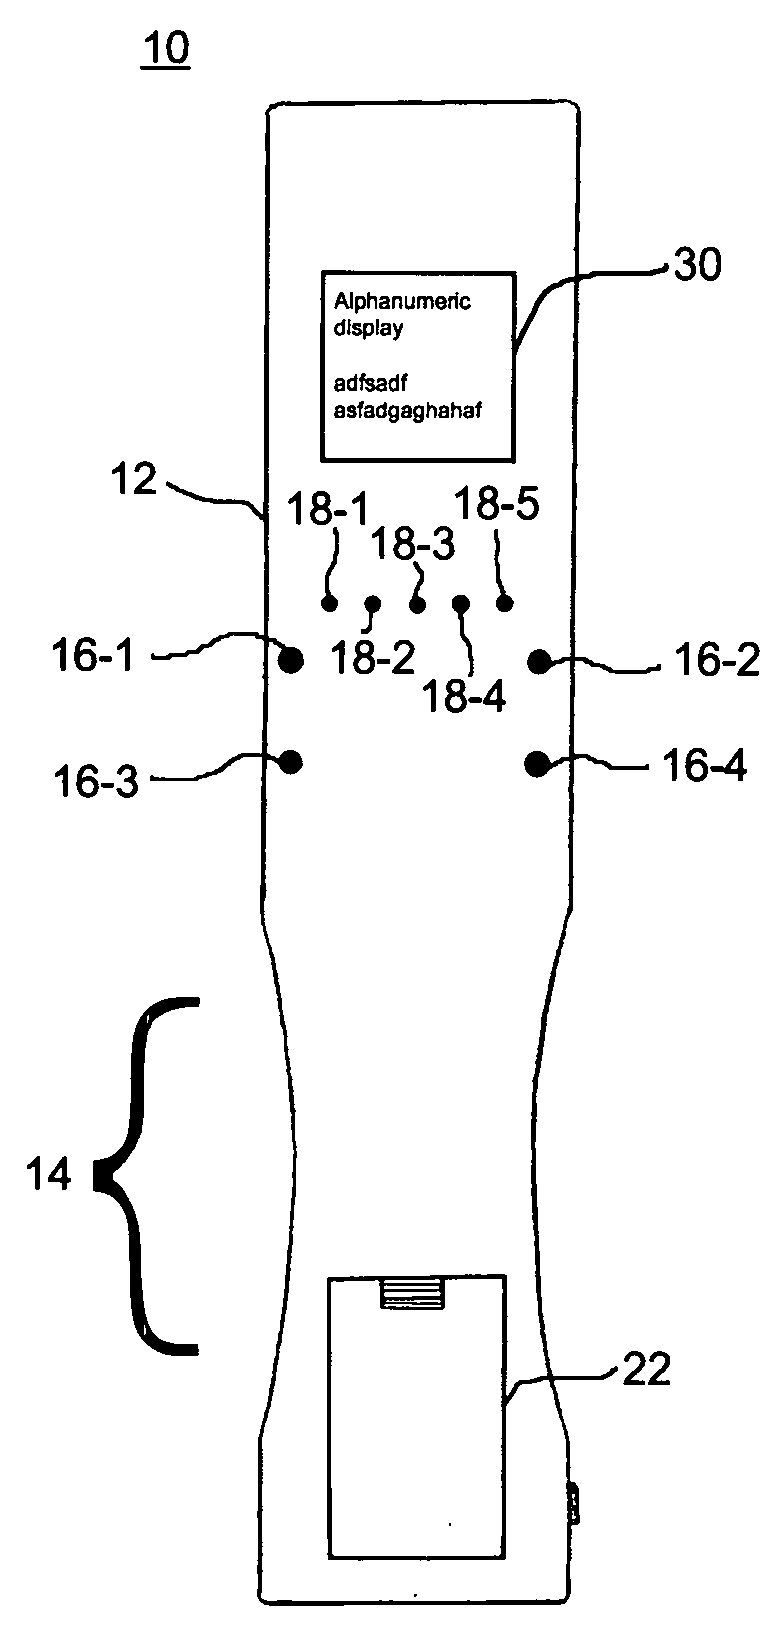 Interactive transcutaneous electrical nerve stimulation device